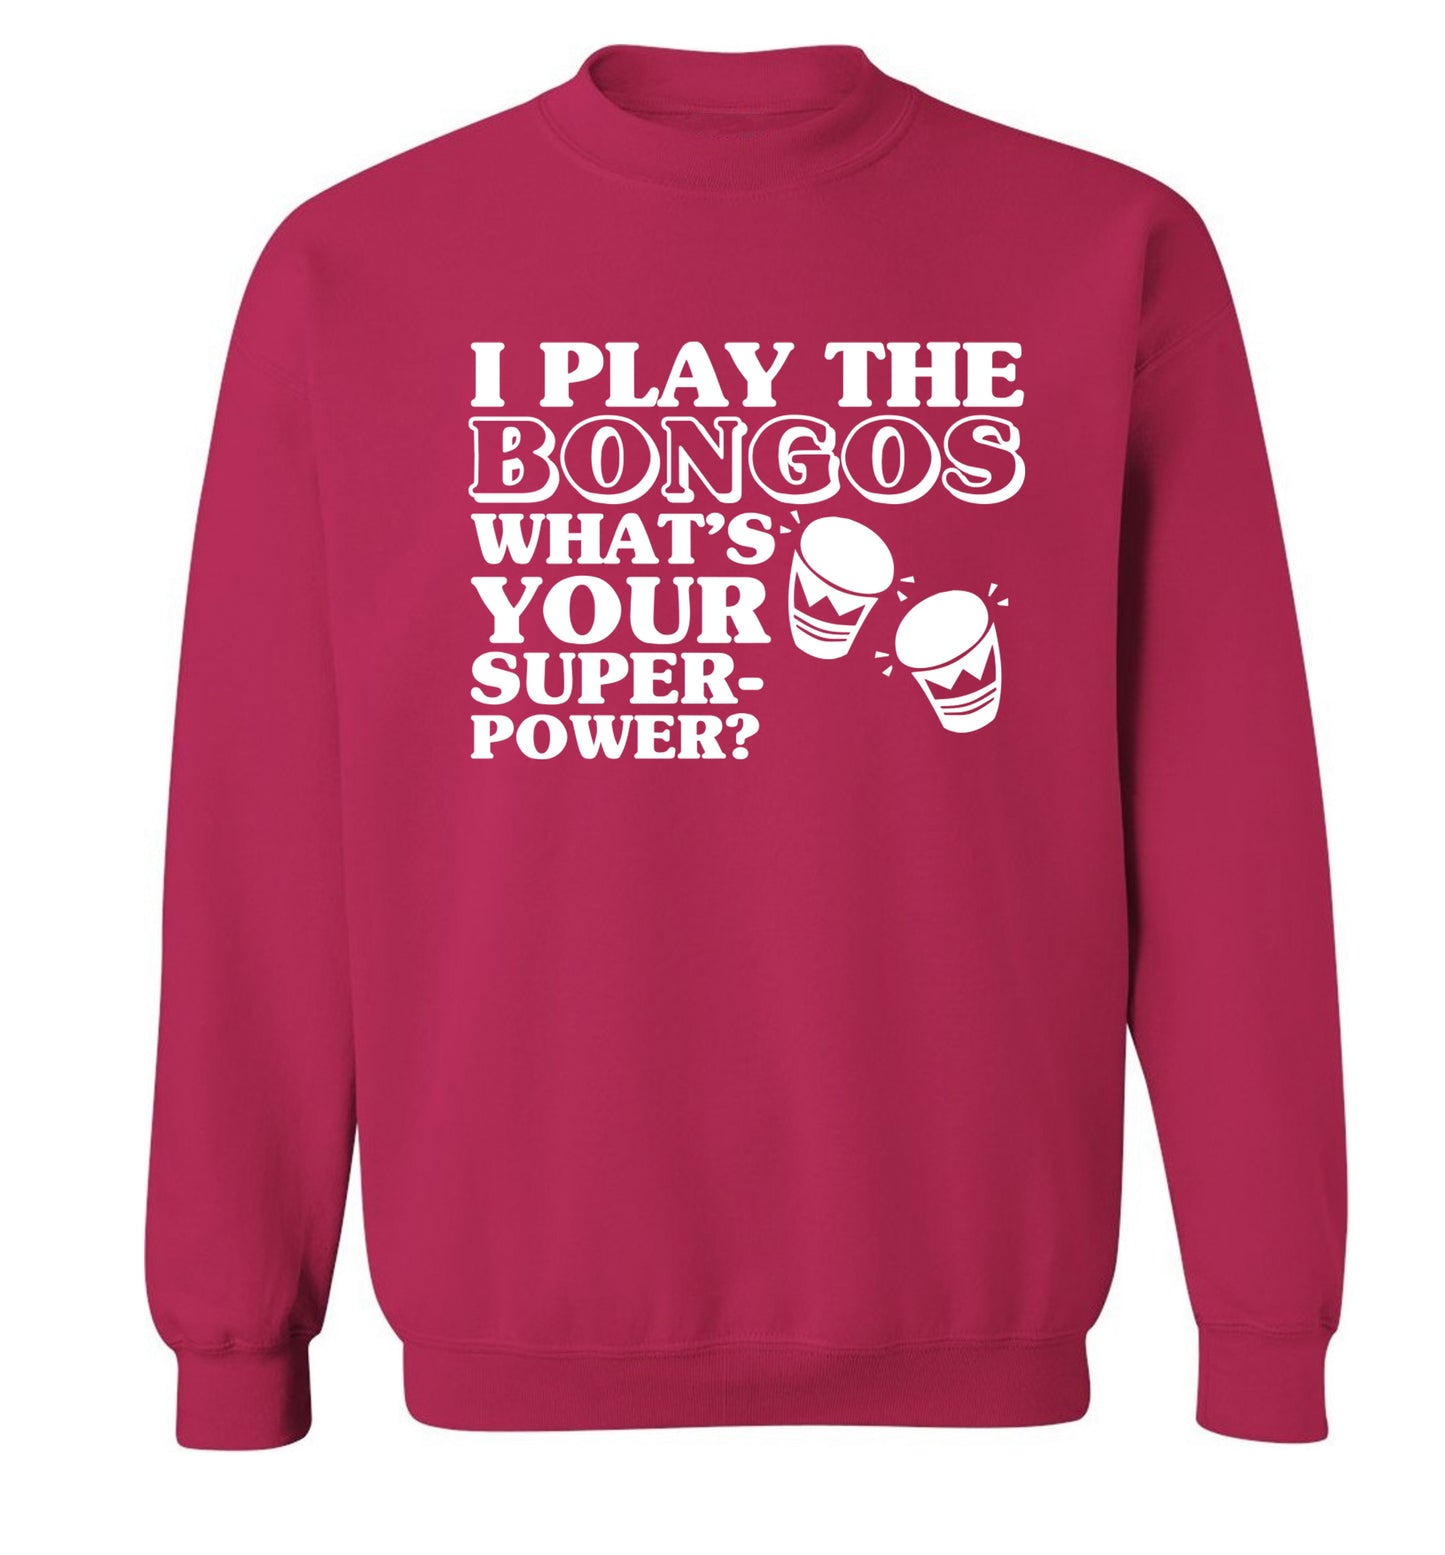 I play the bongos what's your superpower? Adult's unisexpink Sweater 2XL